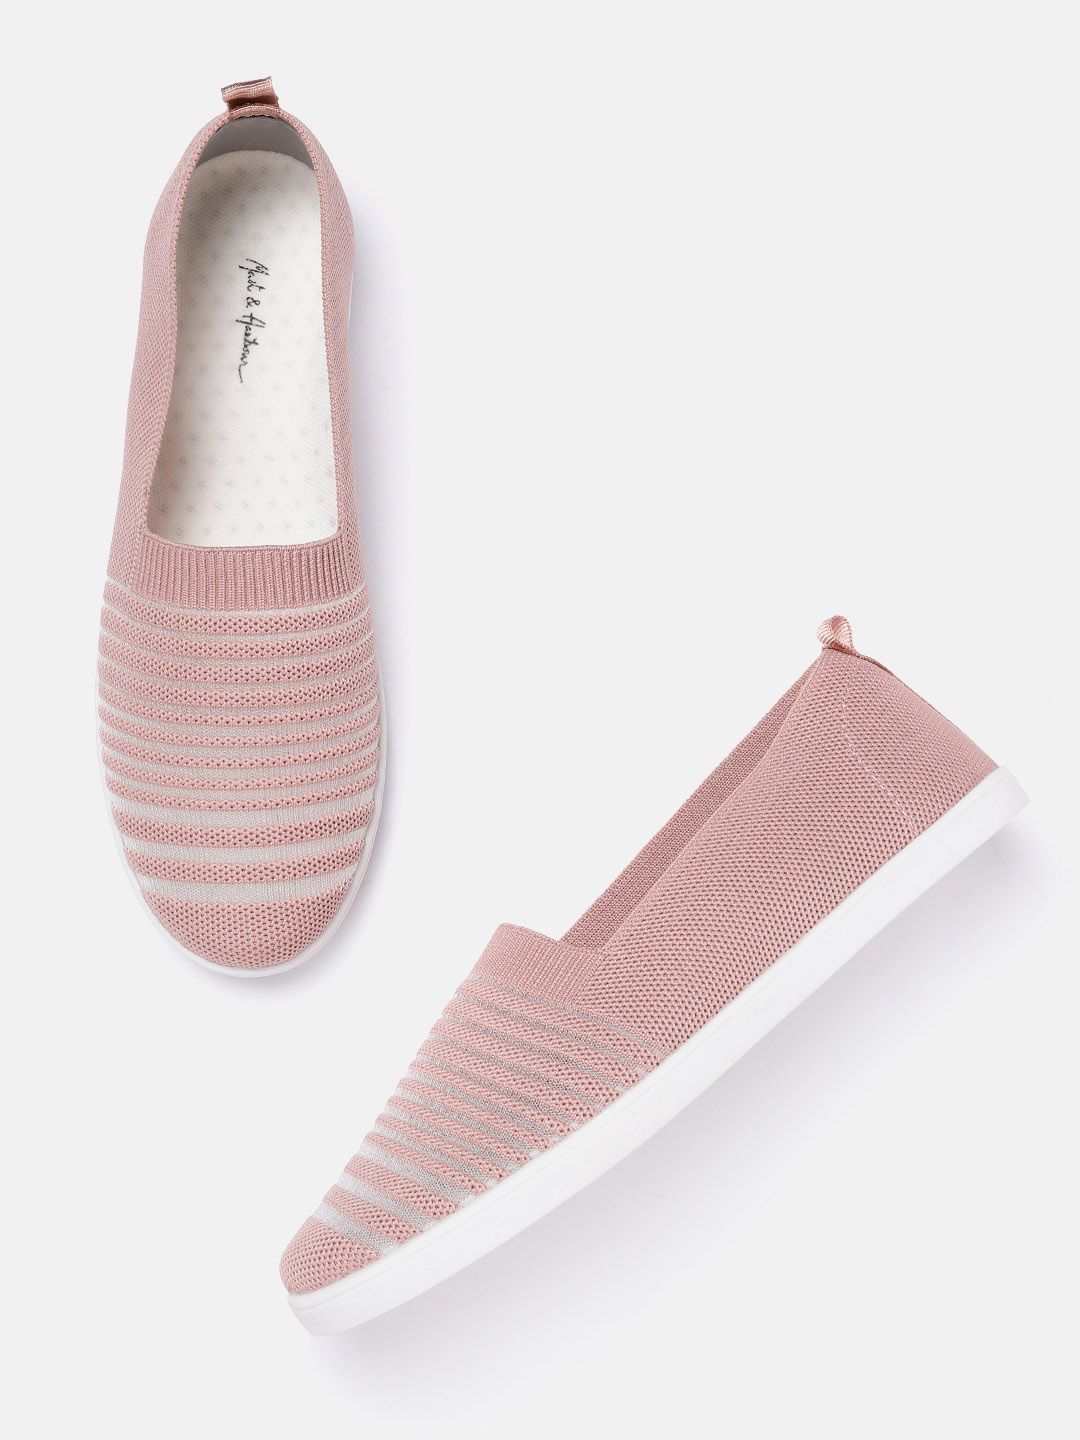 Mast & Harbour Women Dusty Pink Woven Design Striped Slip-On Sneakers Price in India